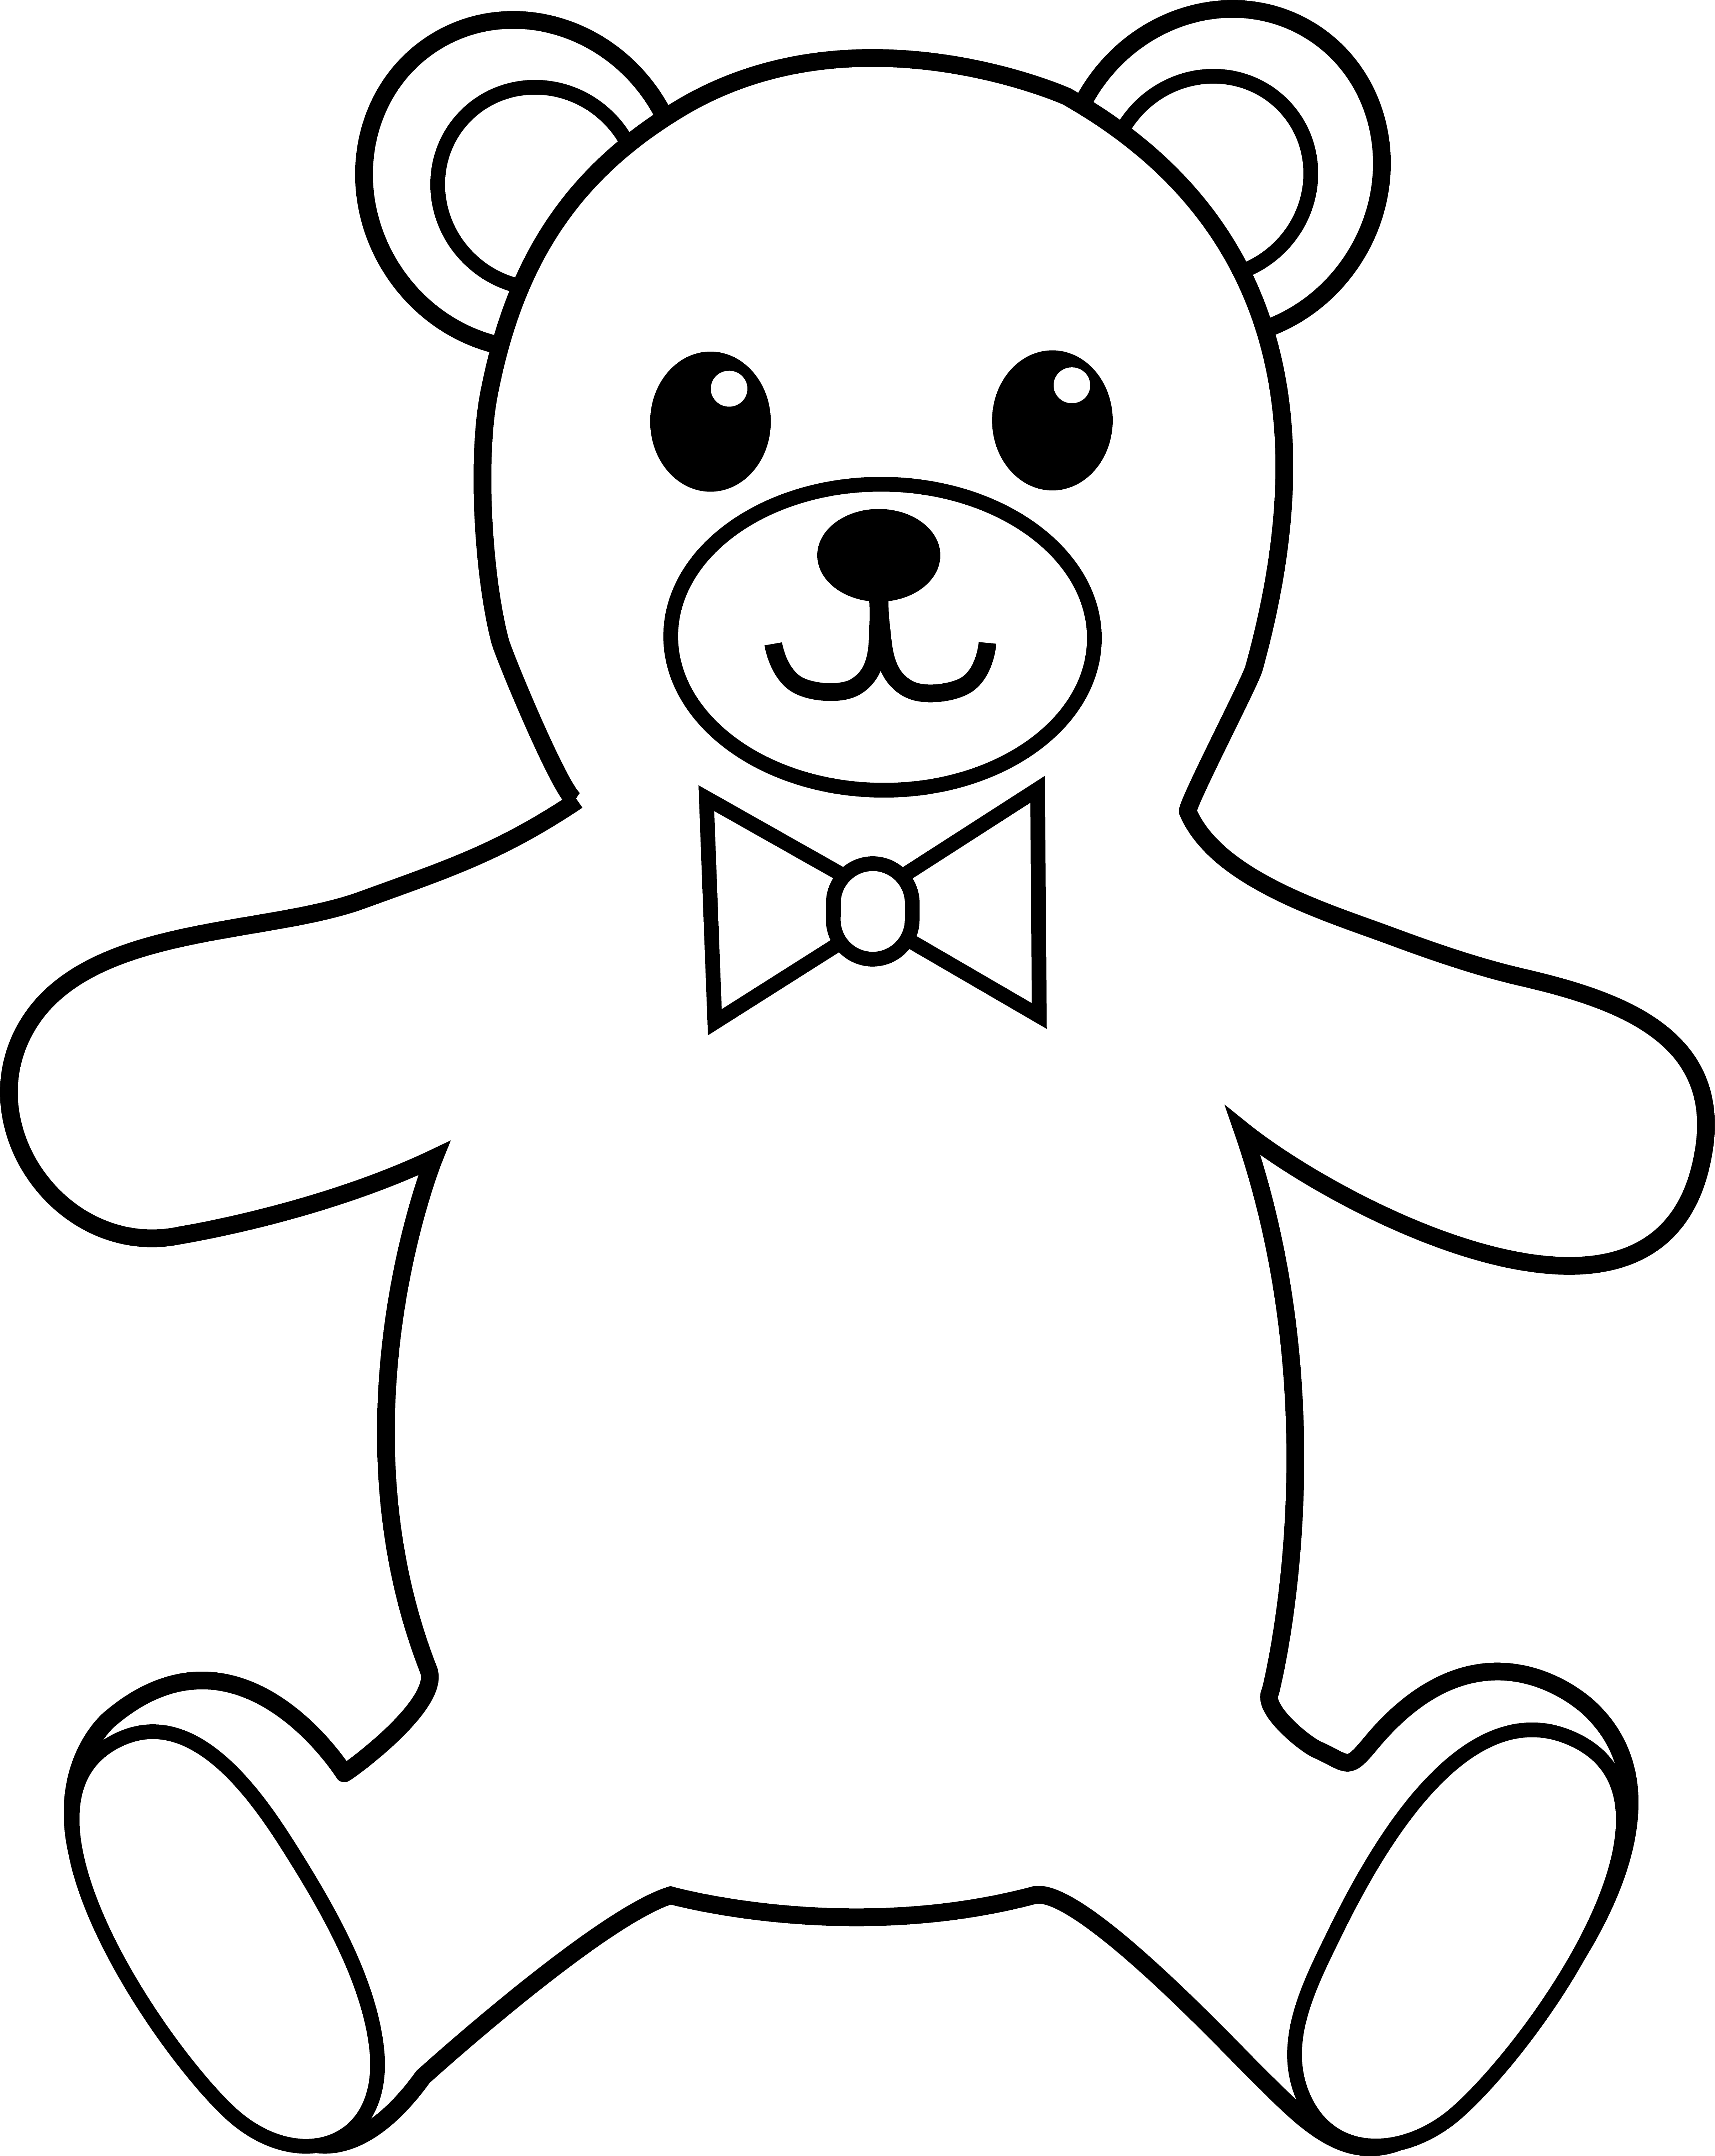 Free Outline Of A Teddy Bear, Download Free Outline Of A Teddy Bear png